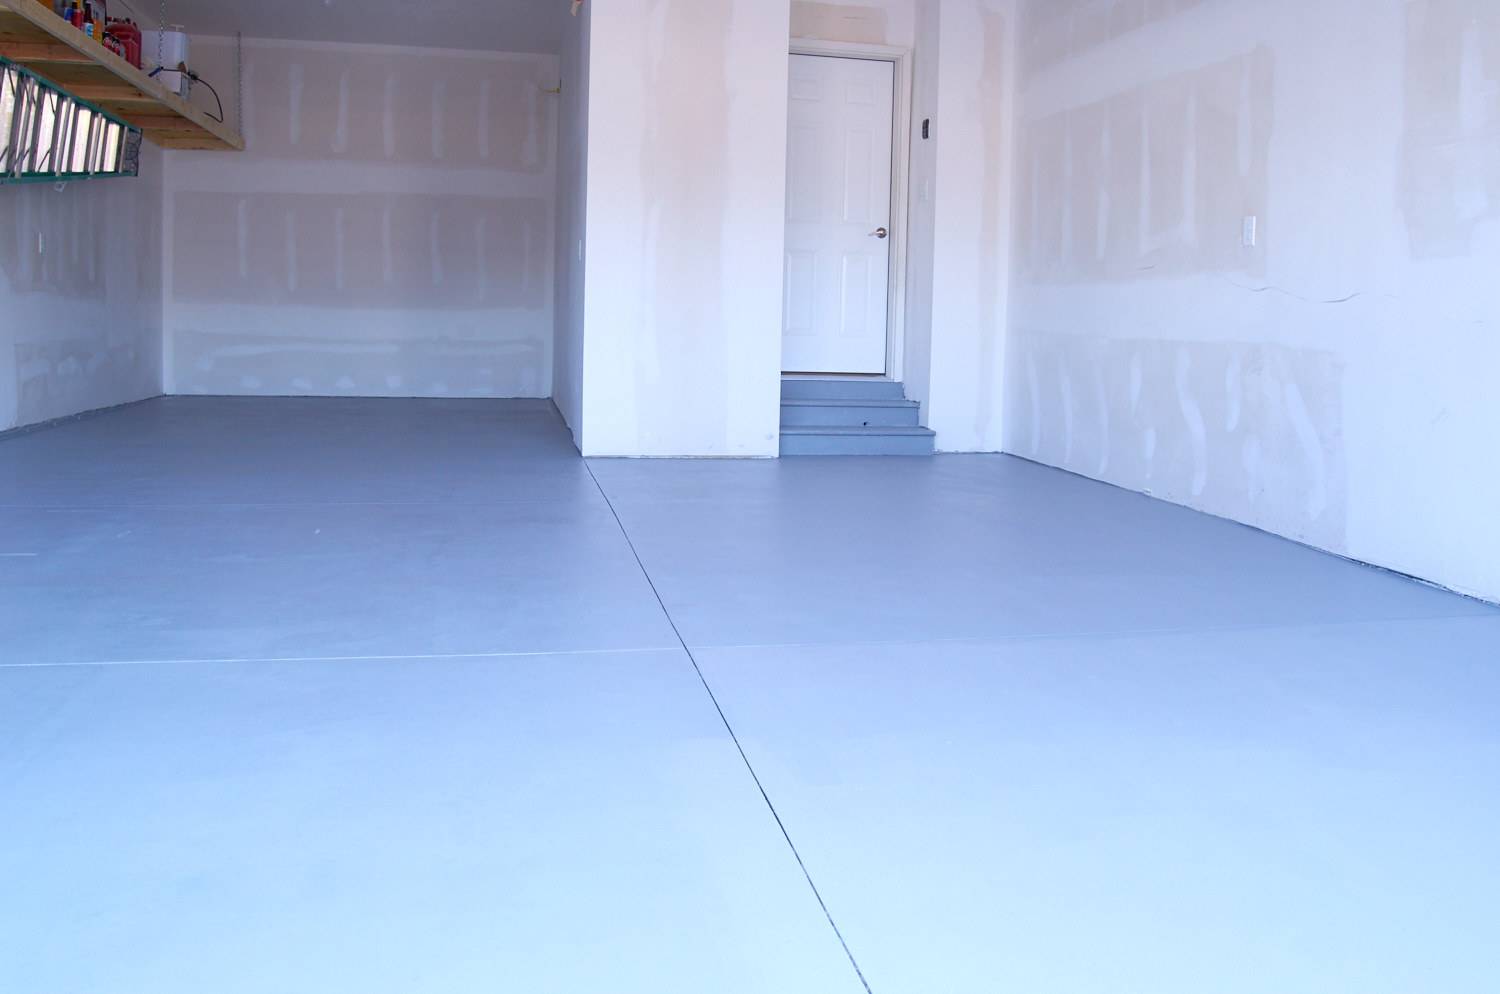 This is a painted garage floor, coated with 1-part epoxy